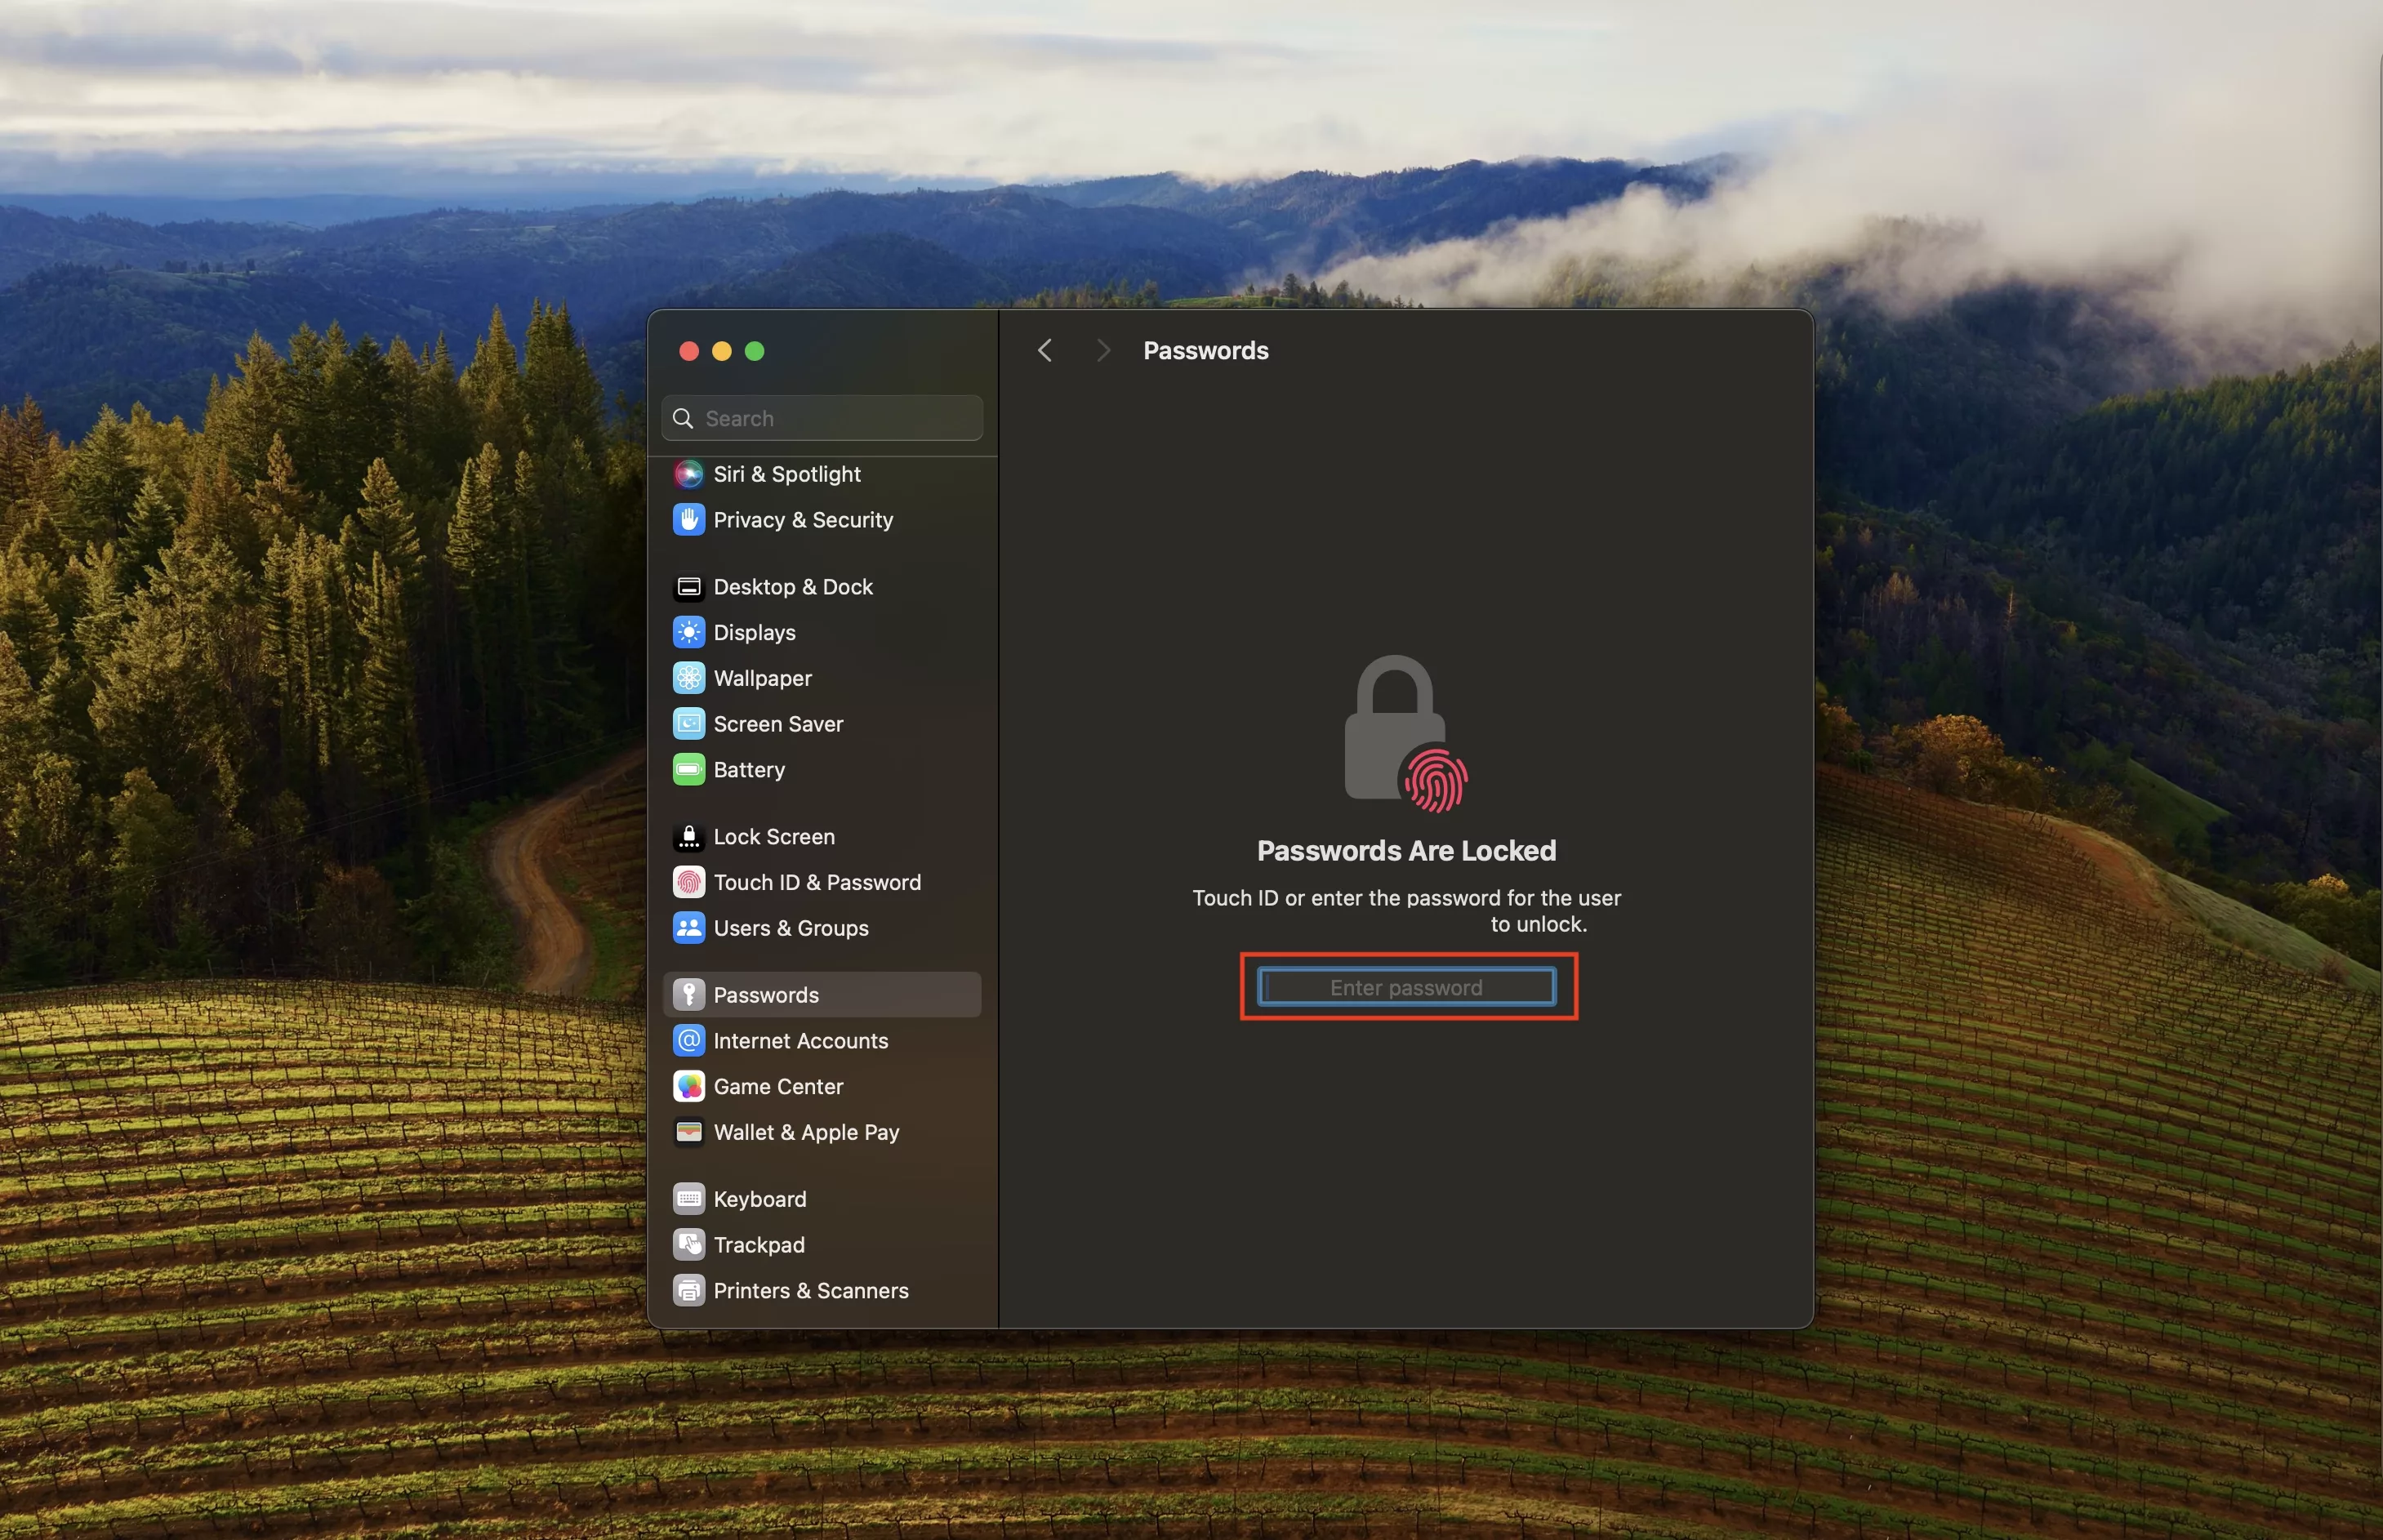 A screenshot of a MacBook desktop showing the System Settings app with the passwords option selected. The System Settings app is requesting a password to access the passwords. When you get to this screen enter your password.